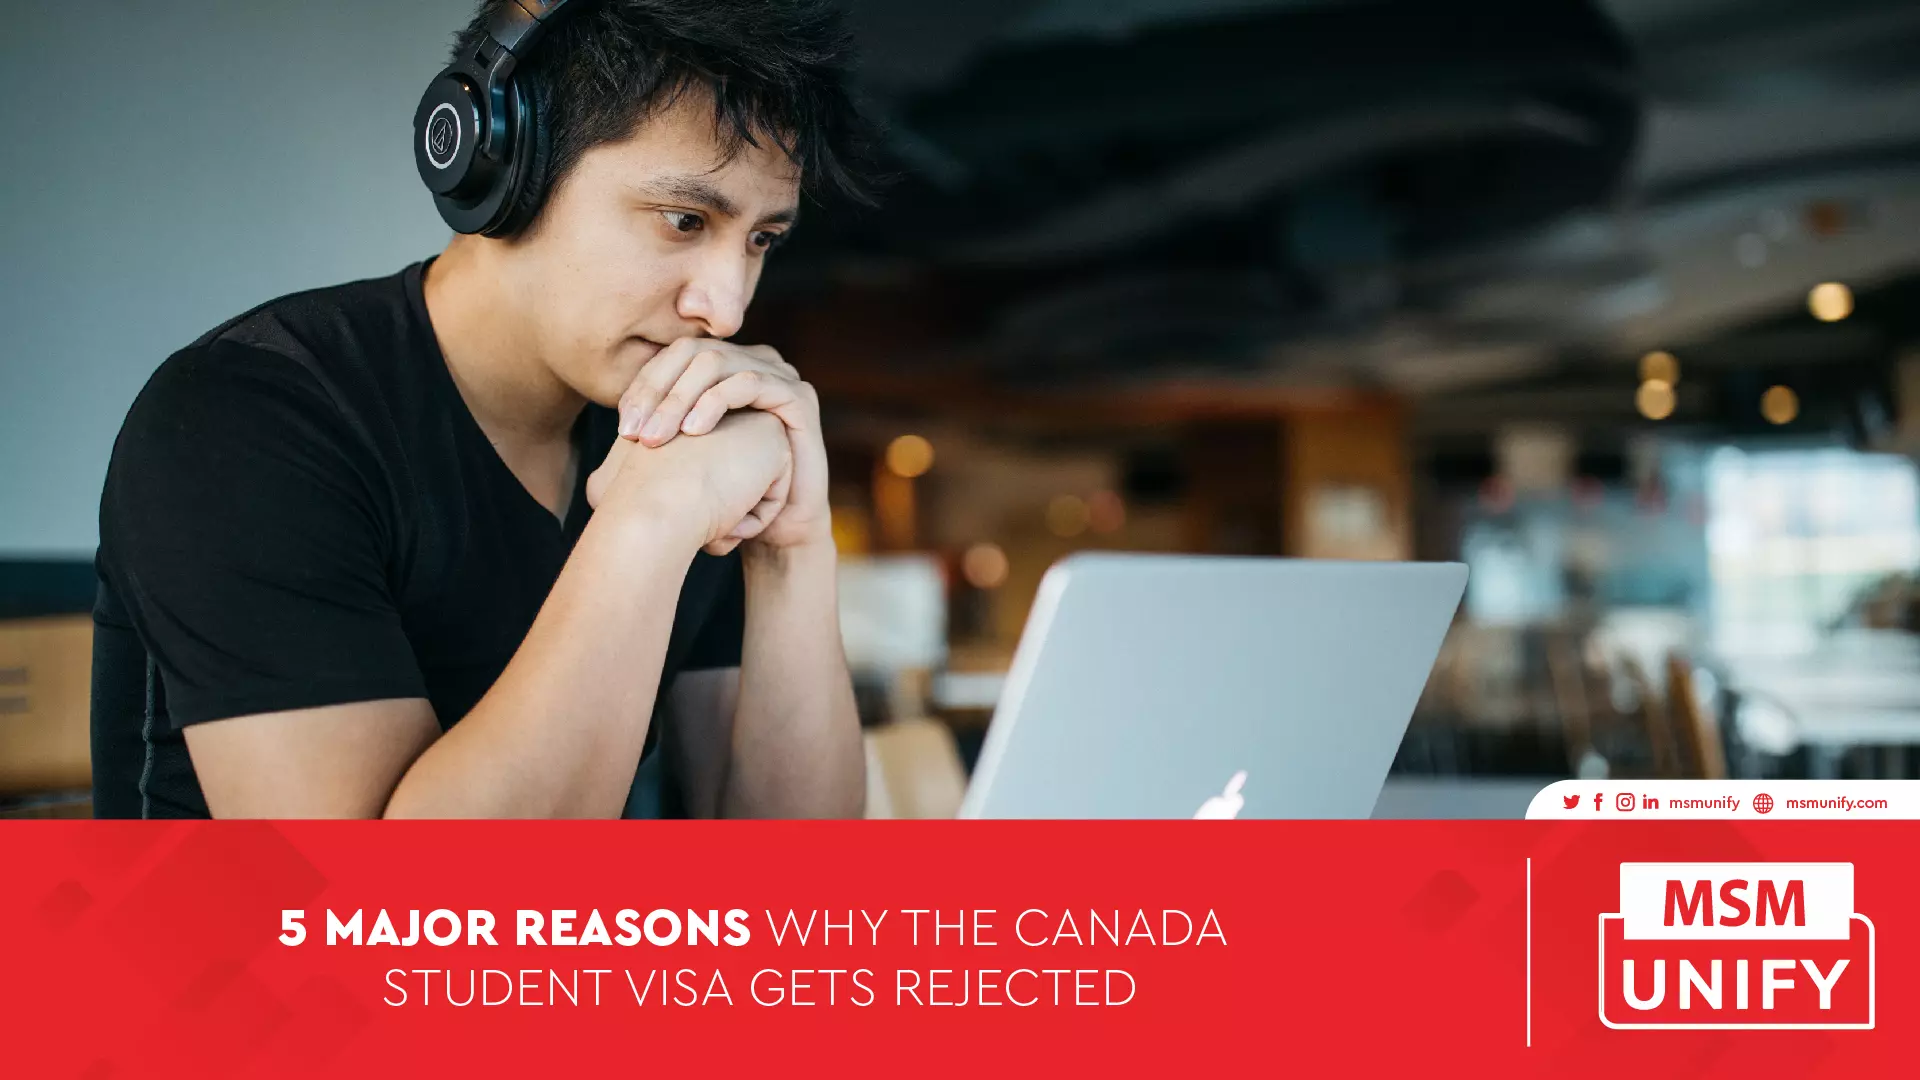 101922 MSM Unify  Major 5 reasons why the Canada Student Visa gets rejected 01 1